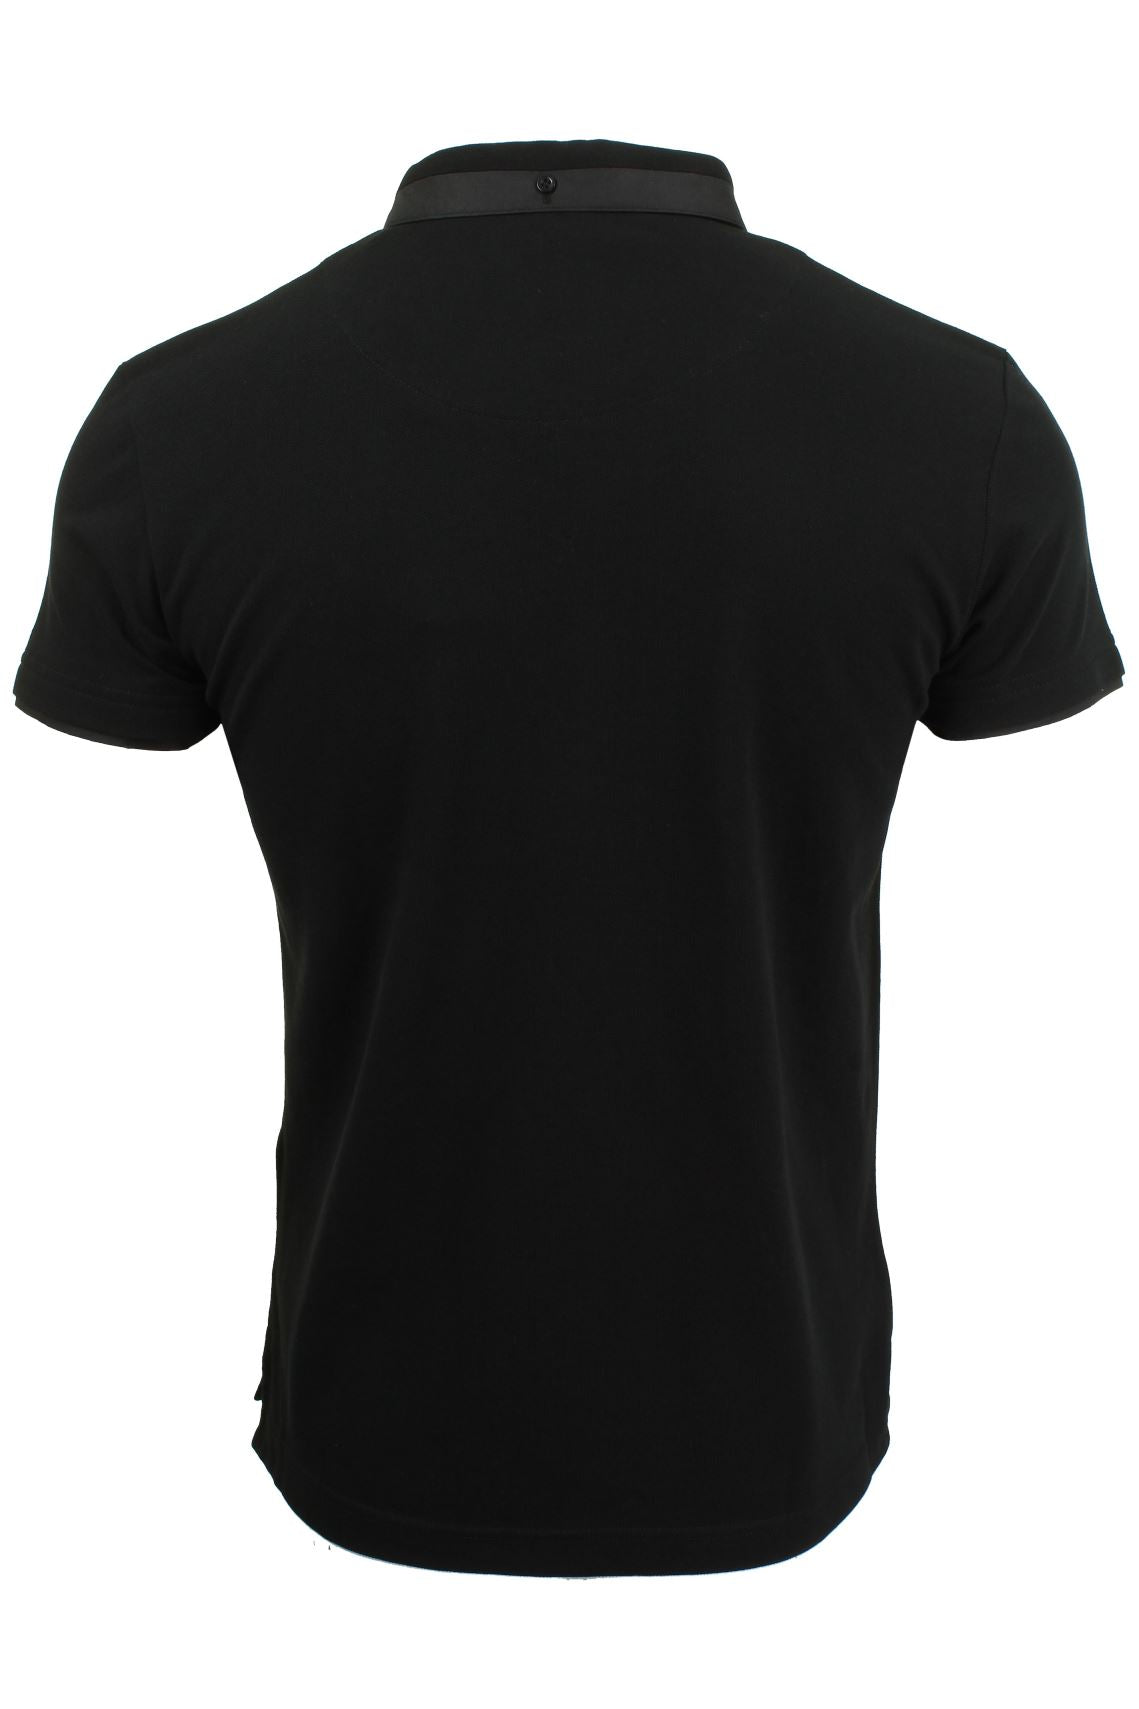 Mens Short Sleeved Polo Shirt from the Blackout Collection by Voi Jeans, 03, Dubb, Mullen - Black